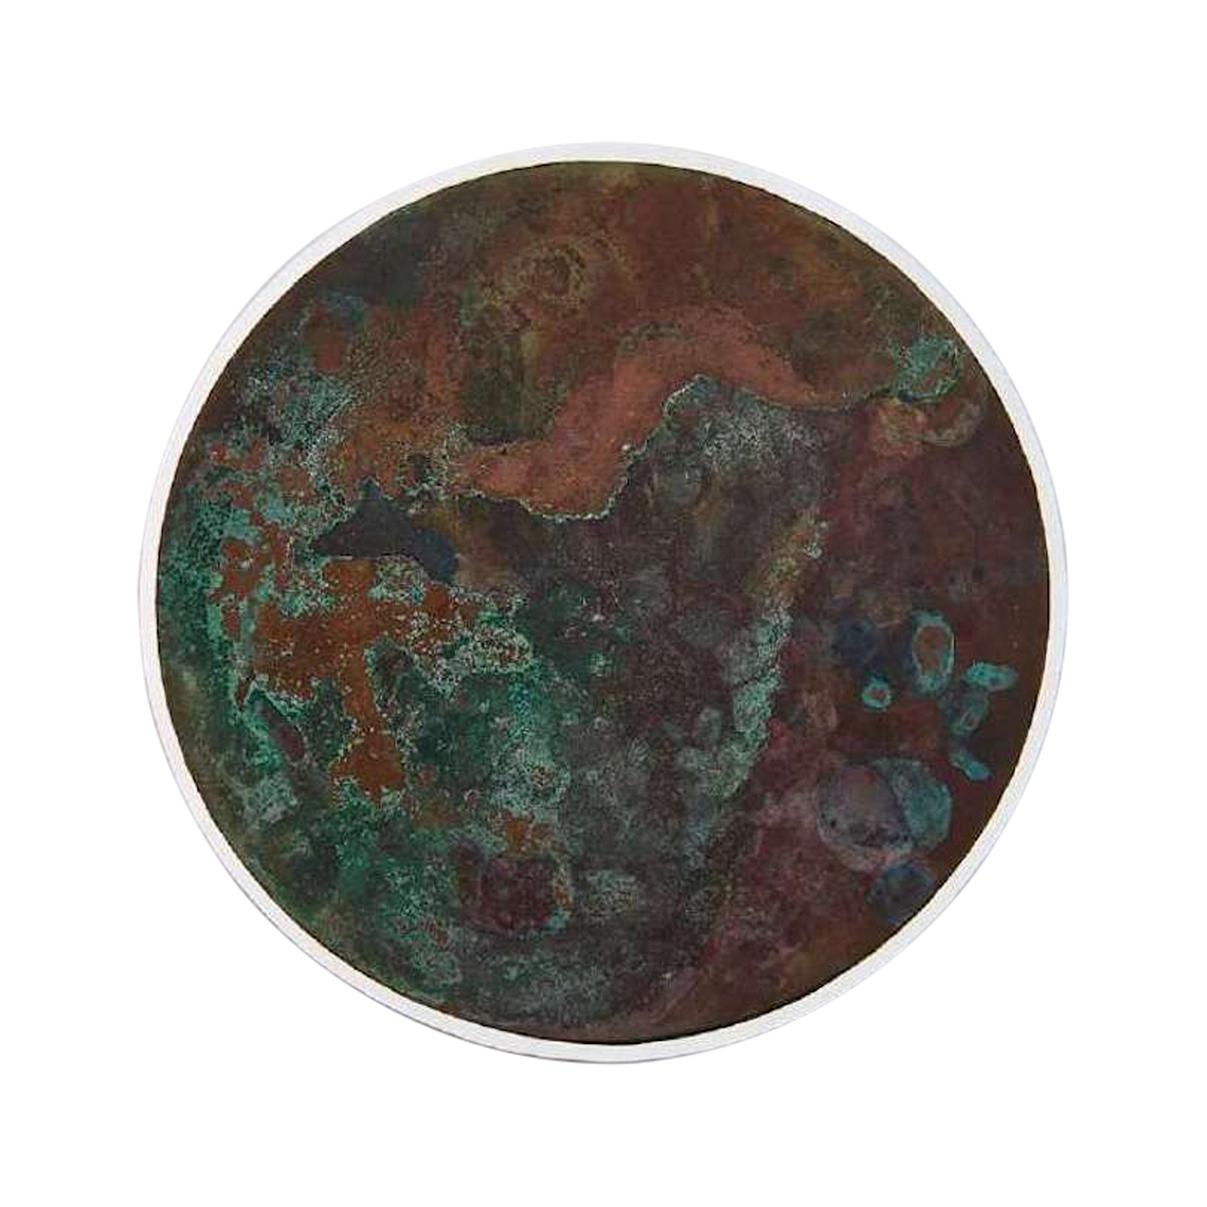 Copper & Stainless Steel Decor/ Plate, 'Star Dust 3.0 #10' by Daishi Luo